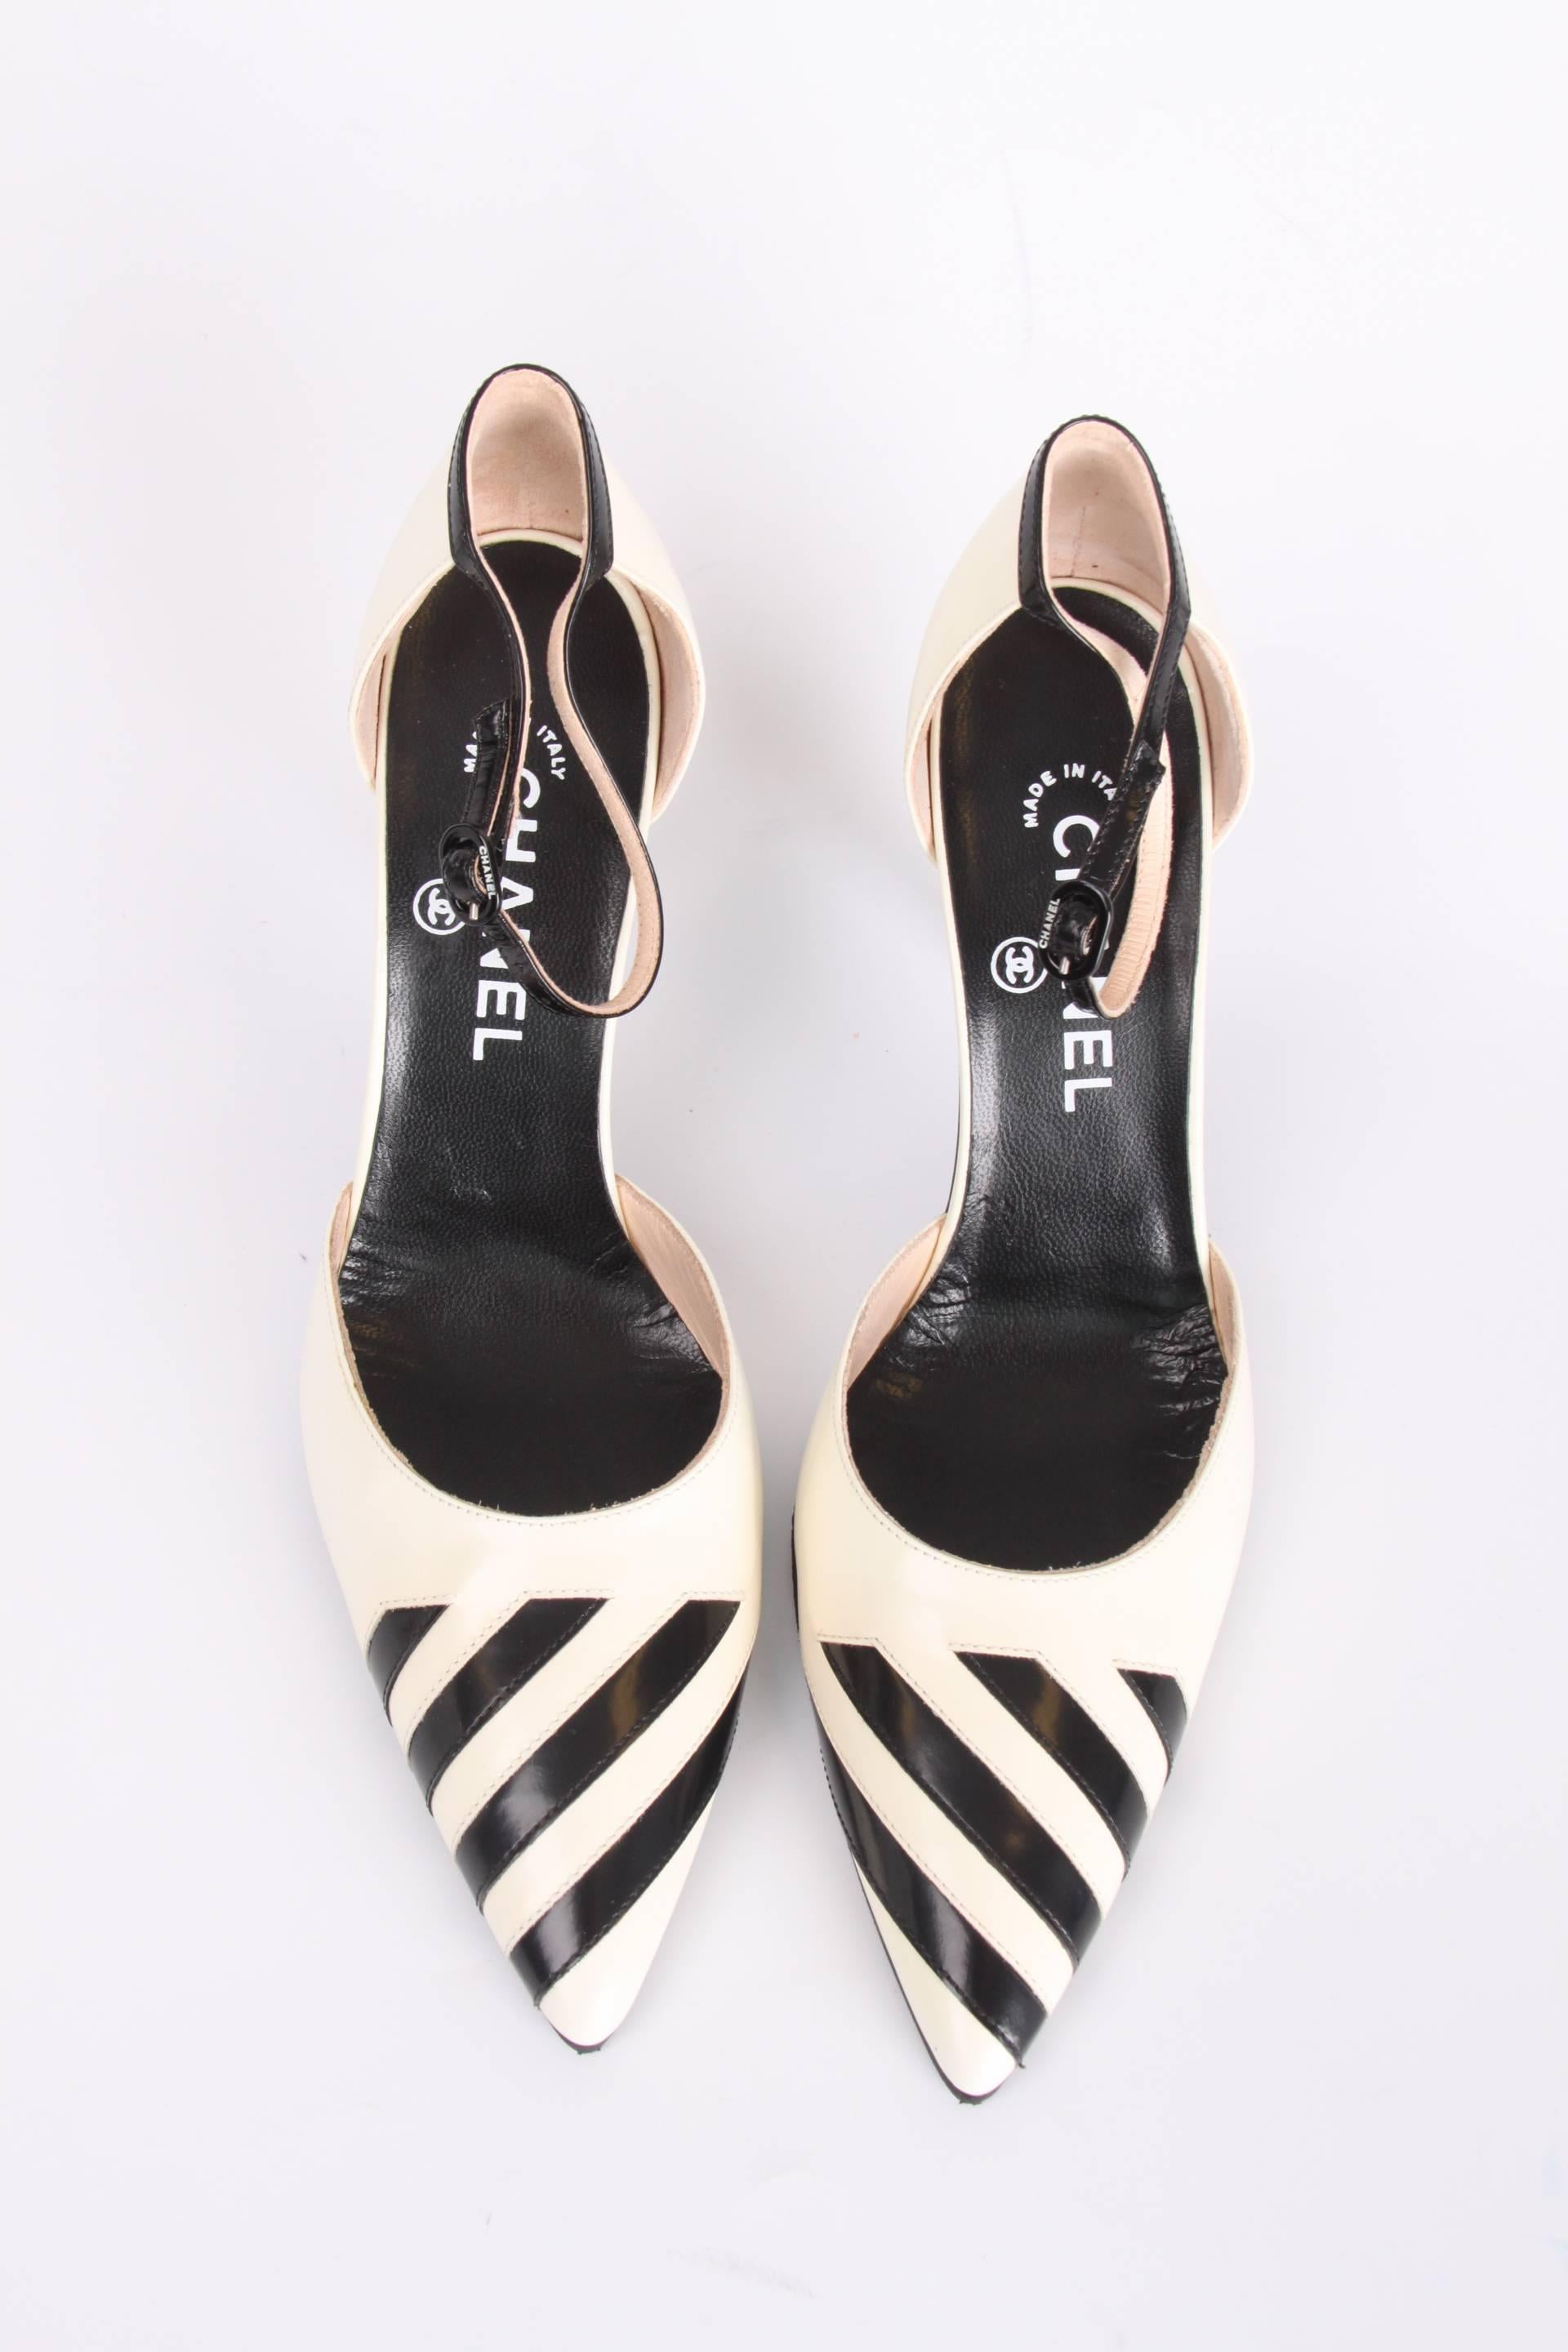 Women's Chanel Pumps - black & white leather  For Sale